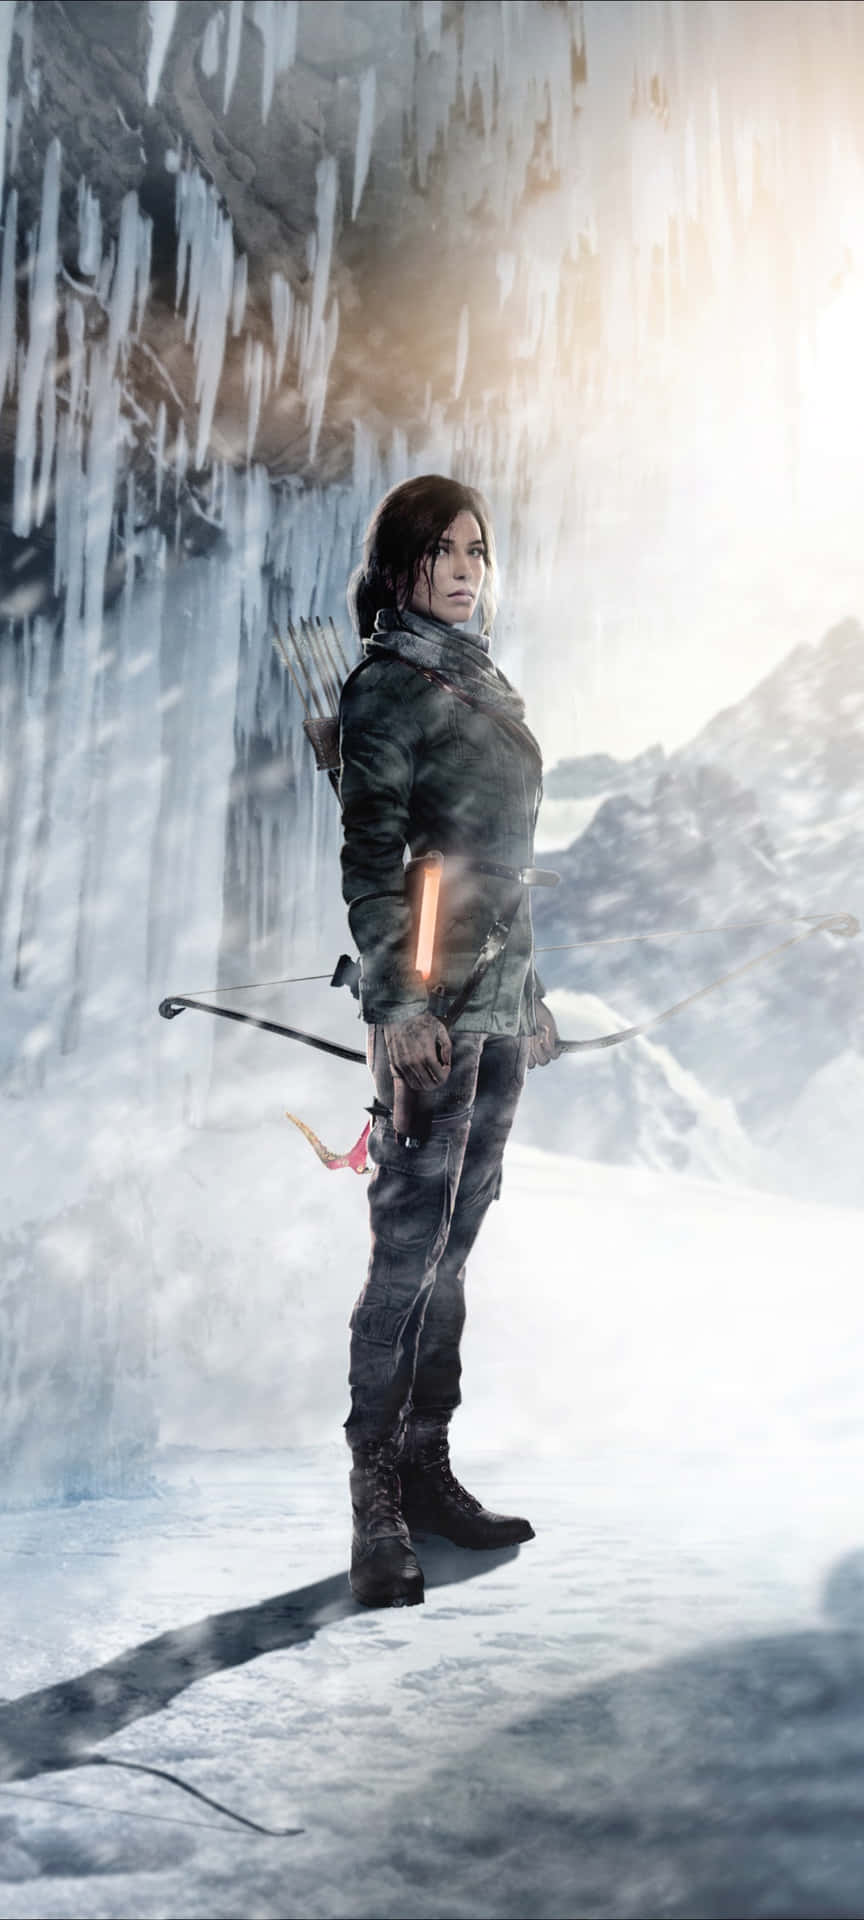 Adventure your way and be fearless like Lara Croft with the Tomb Raider Iphone 5s. Wallpaper